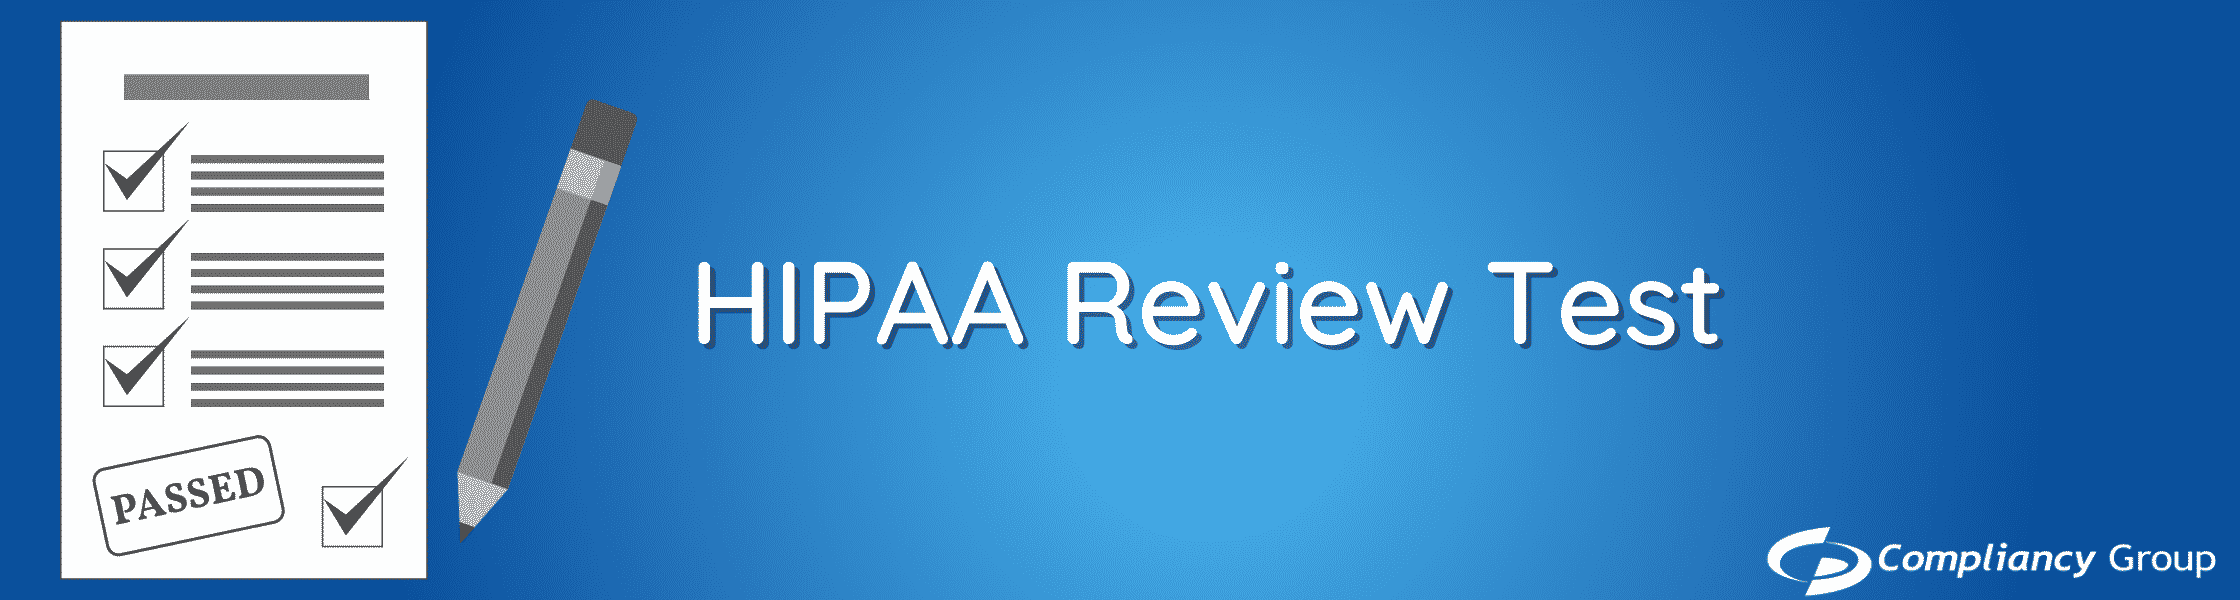 HIPAA Review Test